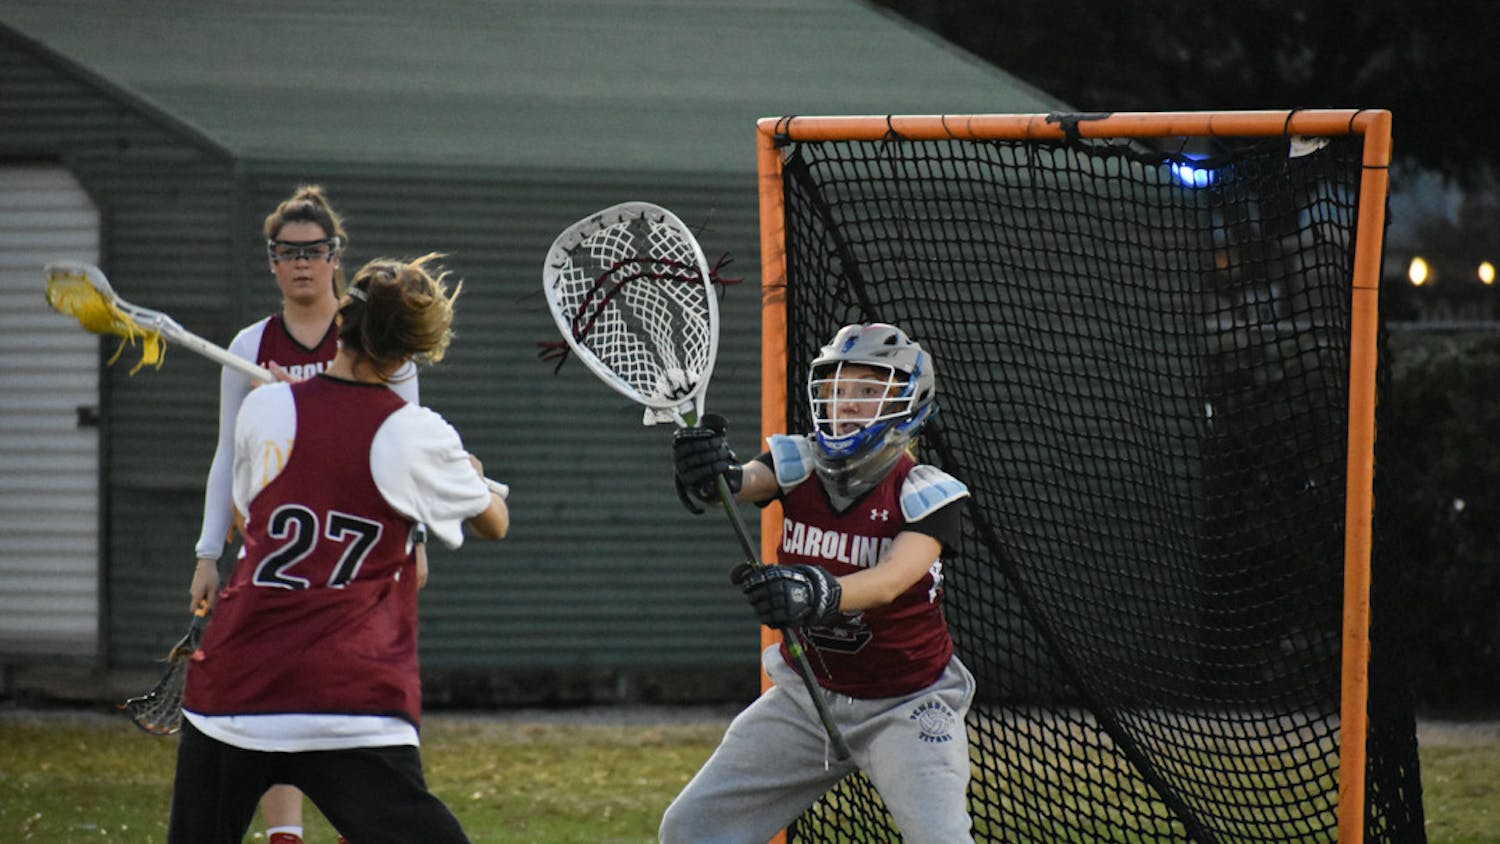 The women’s club lacrosse team practices on Jan. 24, 2023, for their upcoming away game against Auburn on Jan. 28, 2023. The team held an intrasquad scrimmage to evaluate members' skill sets.